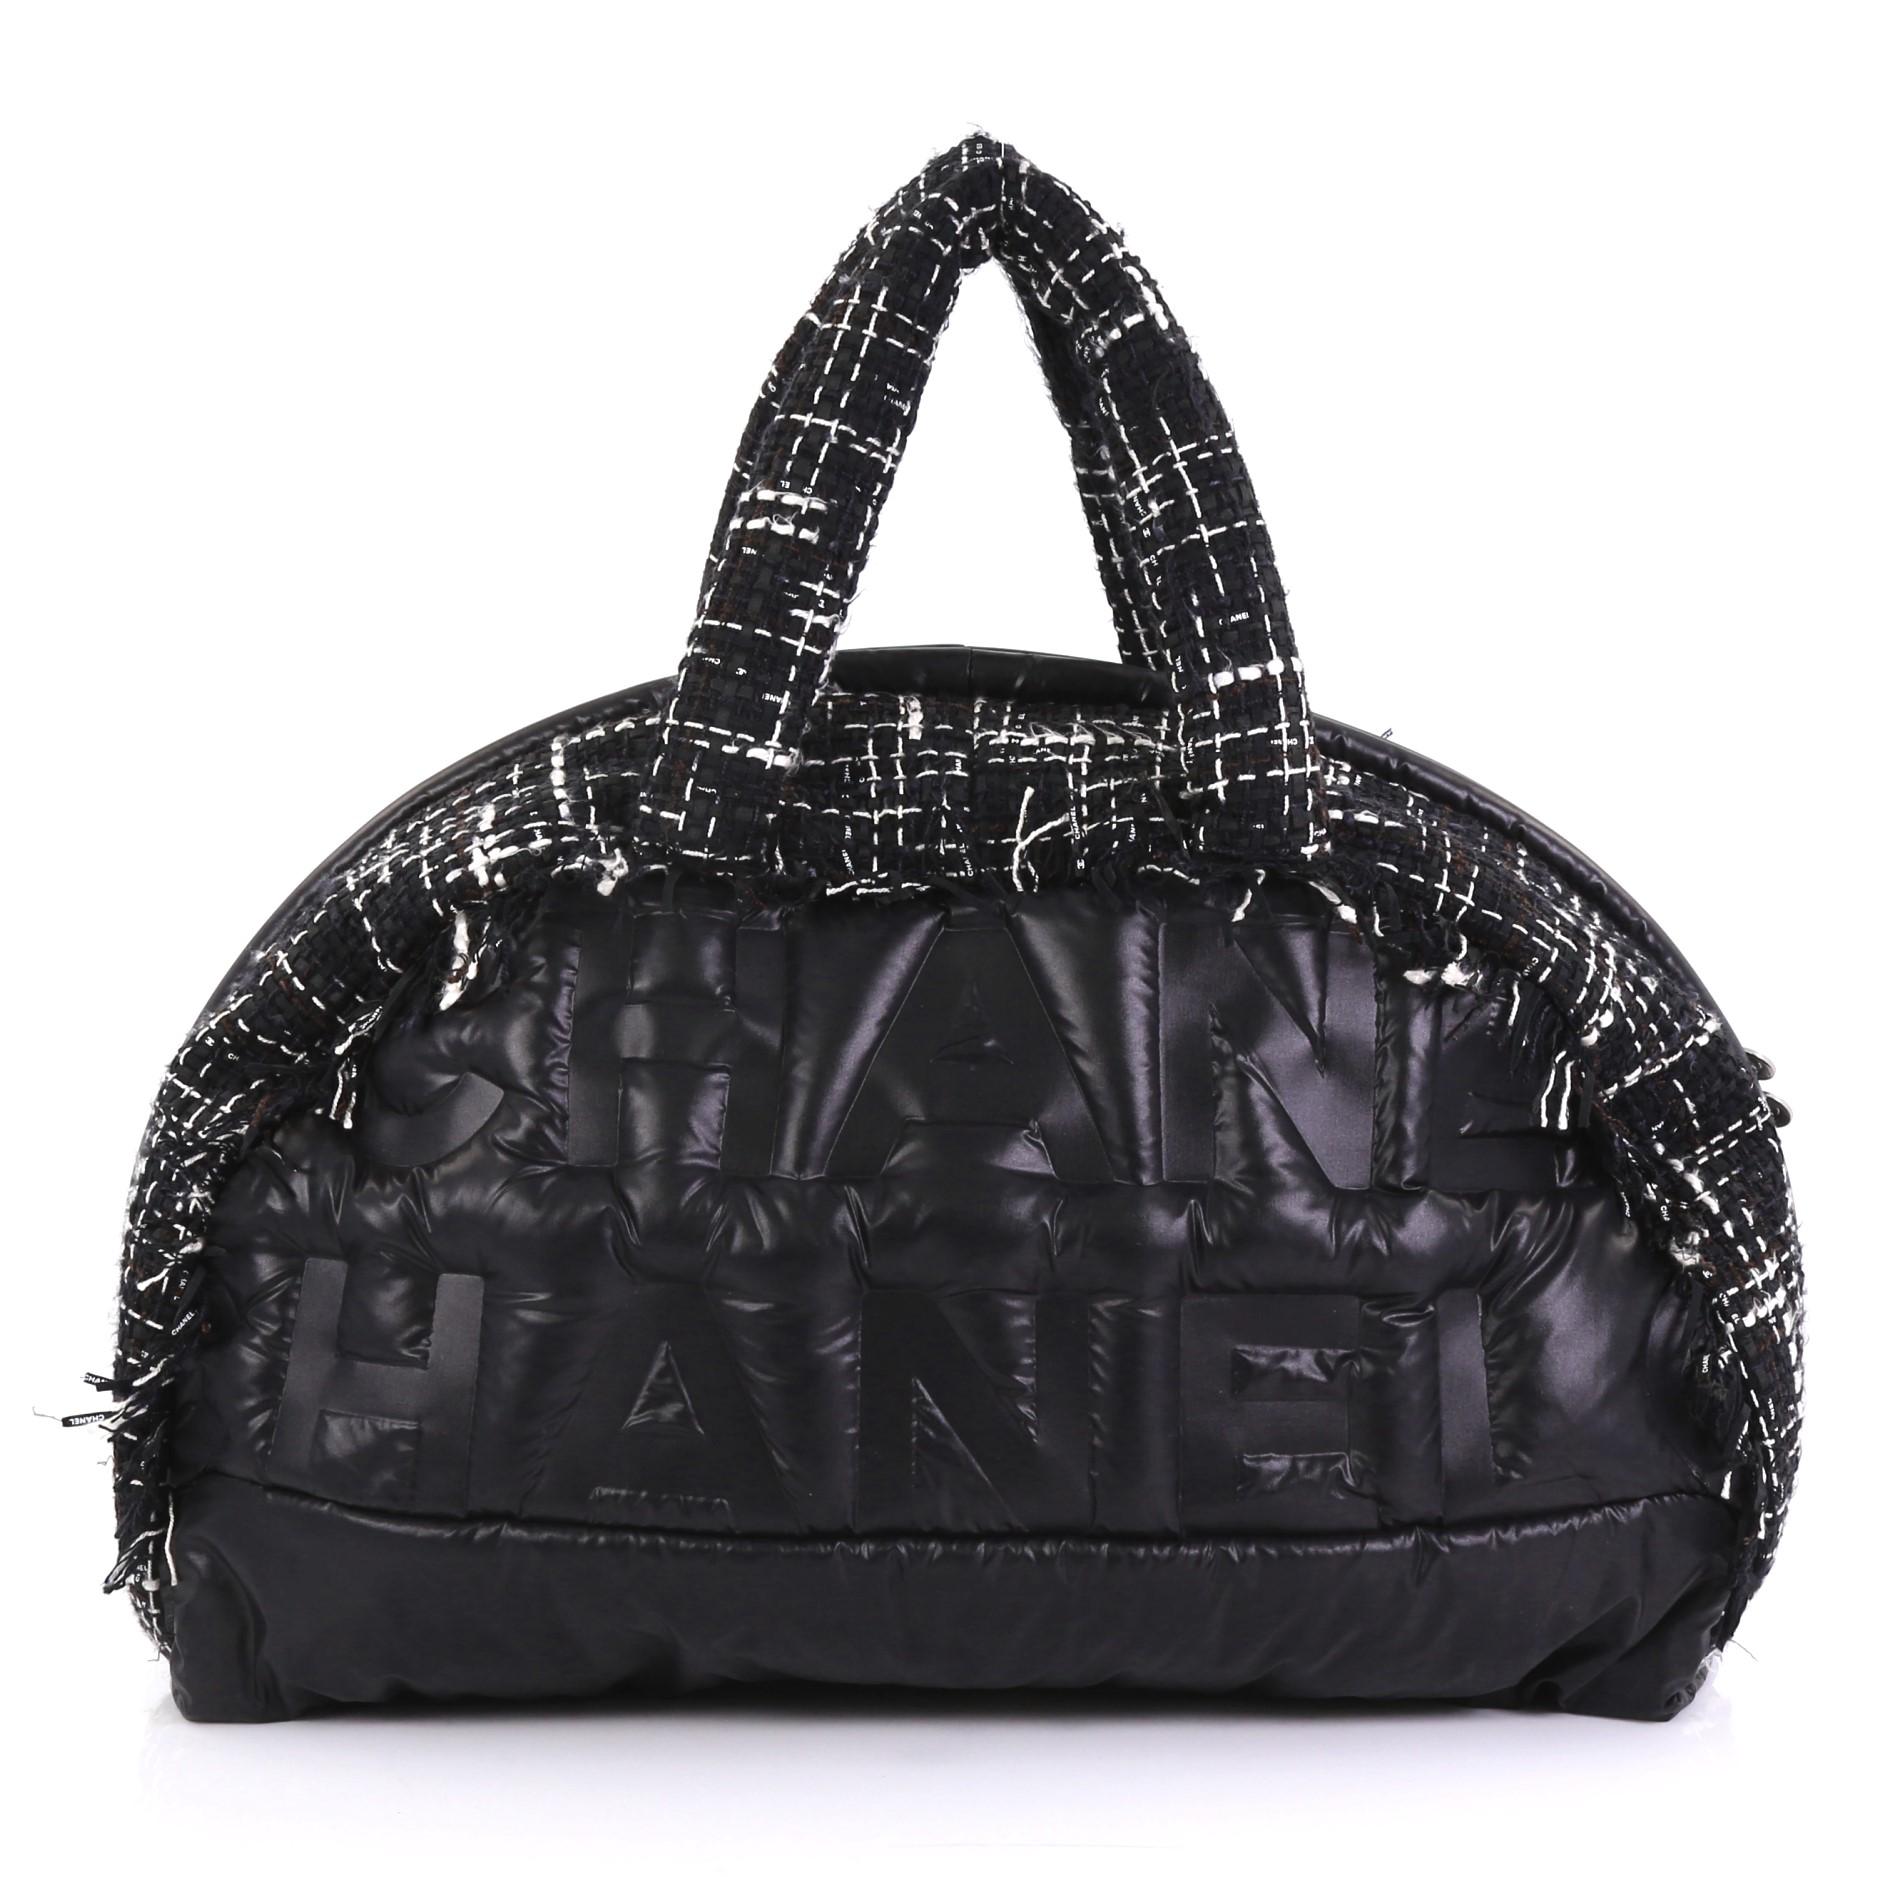 Black Chanel Doudoune Bowling Bag Embossed Nylon with Tweed Large